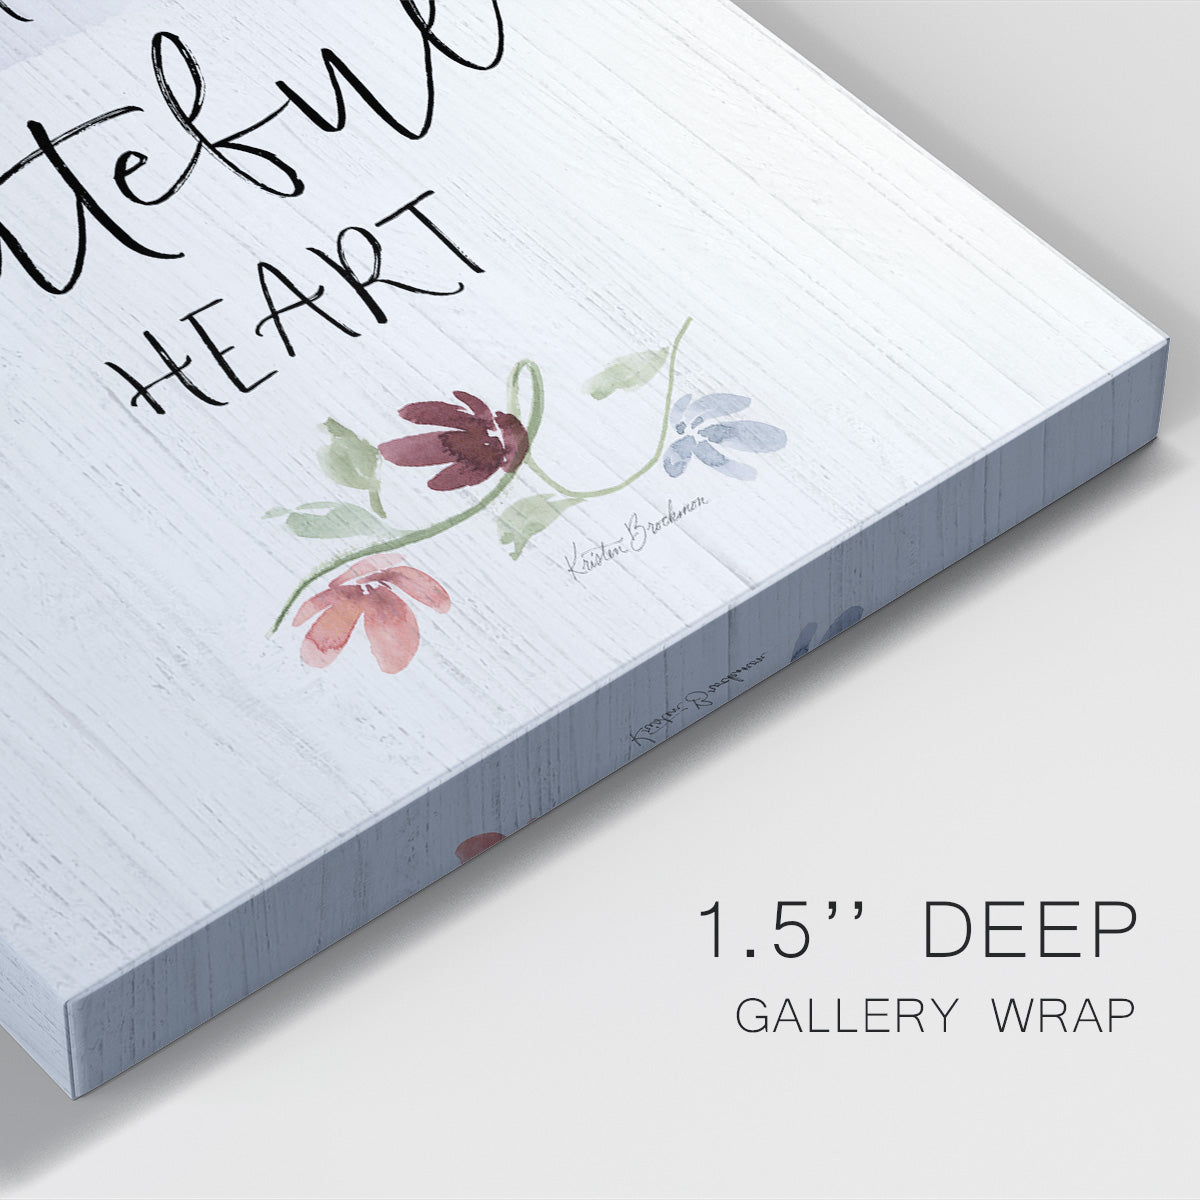 Grateful Heart Premium Gallery Wrapped Canvas - Ready to Hang